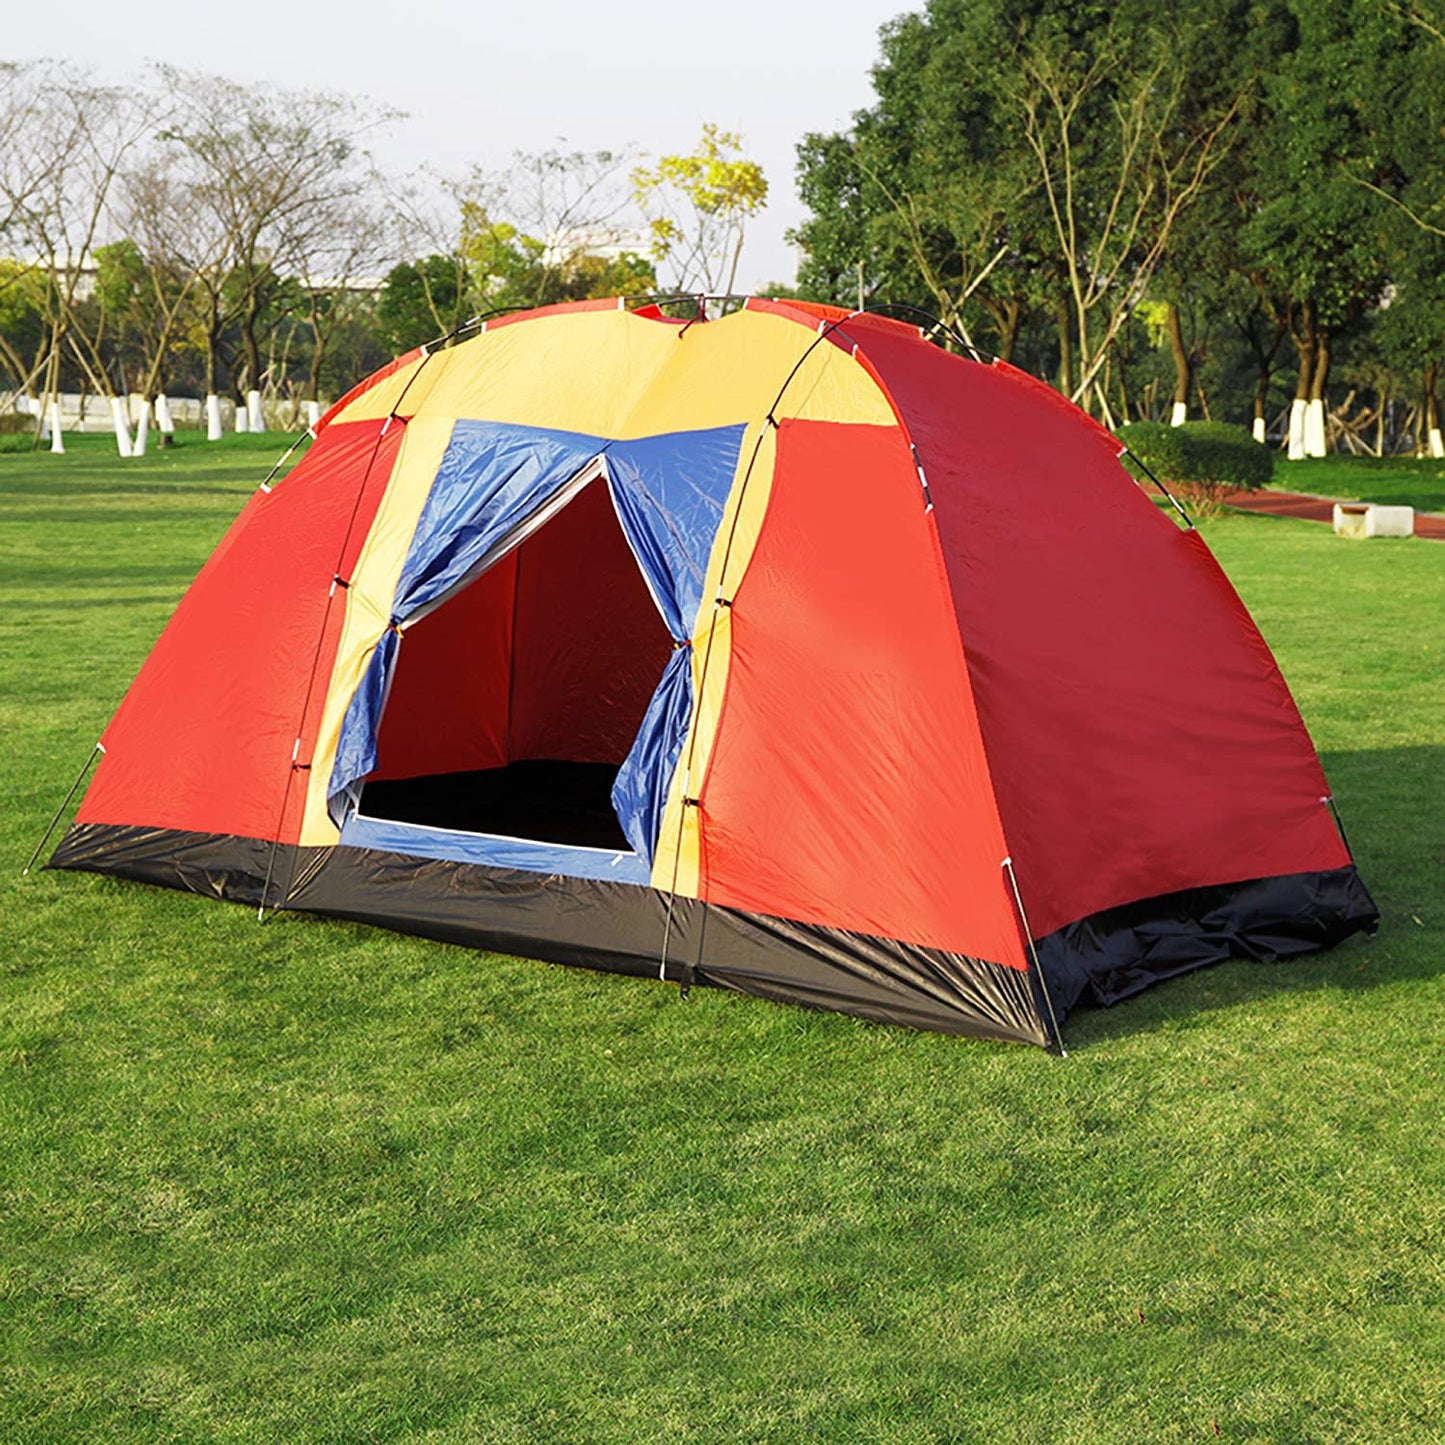 8 Person Backyard Camping Tent Easy Setup,12.5ft